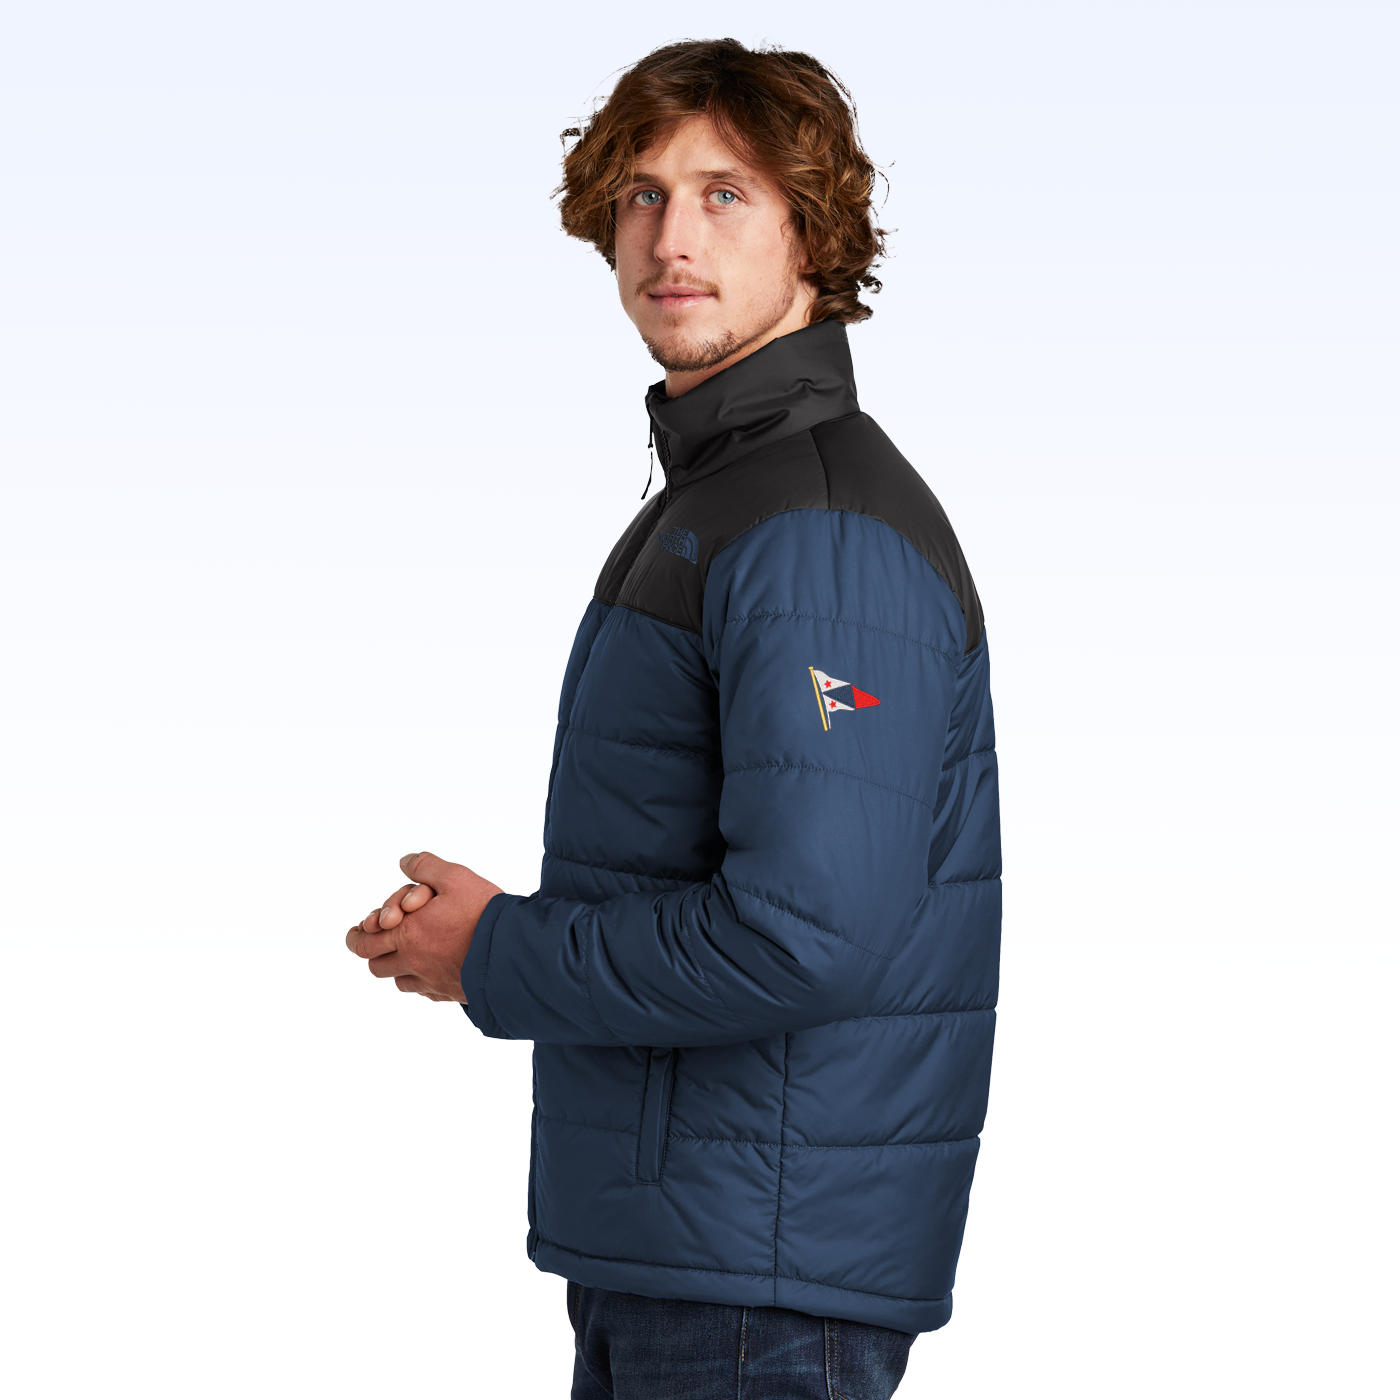 THE NORTH FACE EVERYDAY INSULATED JACKET